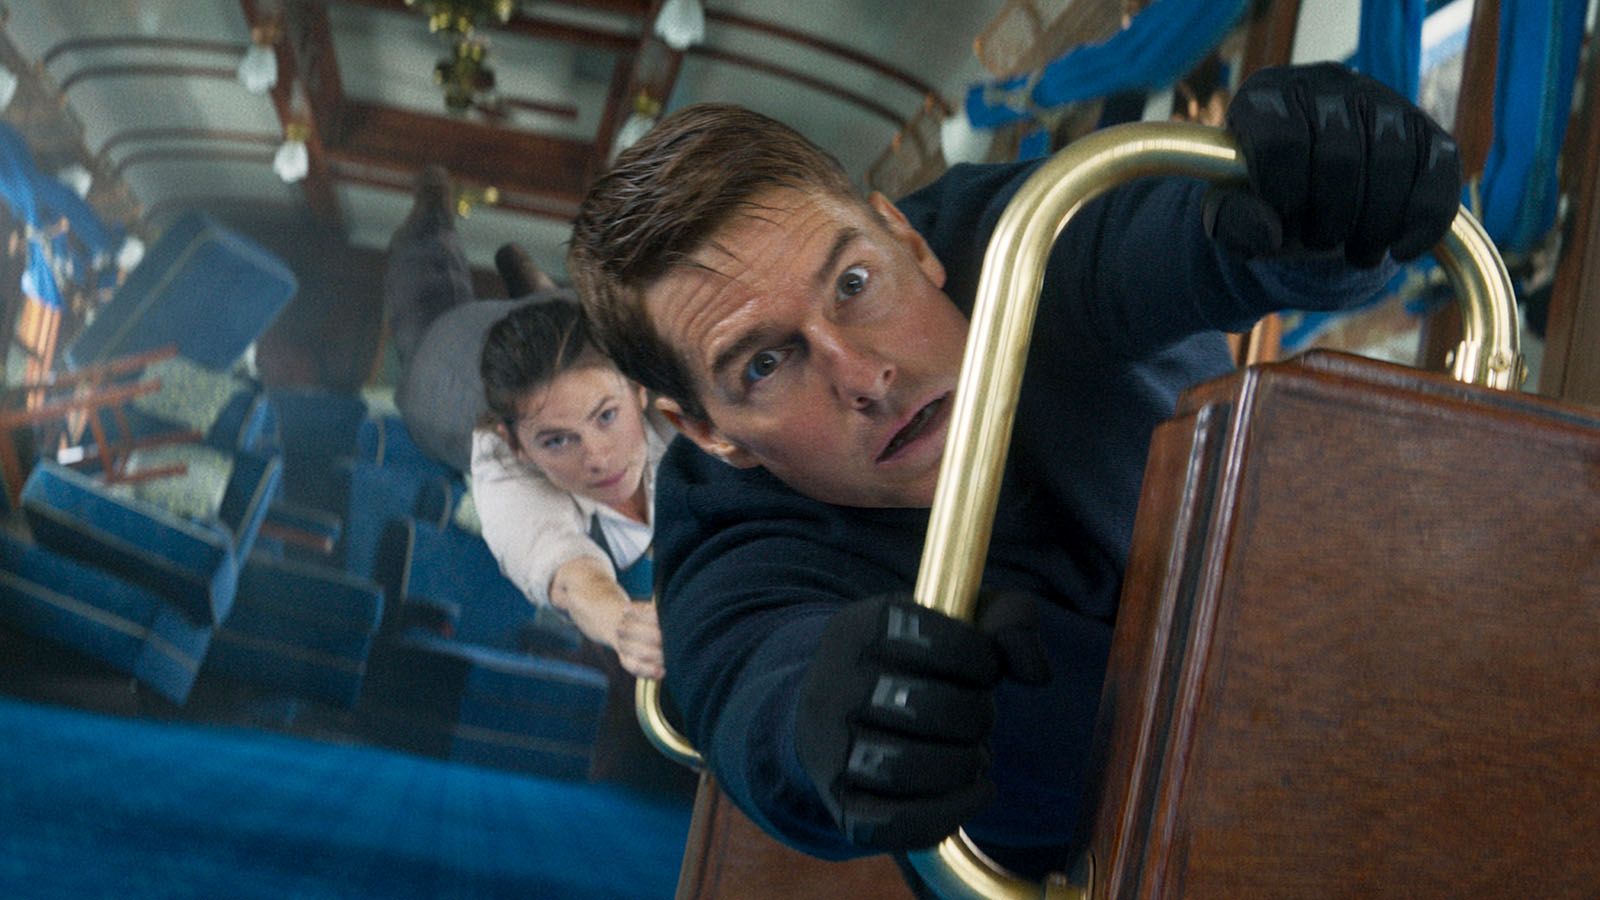 Tom Cruise once again brings his 'A' game to Mission: Impossible.